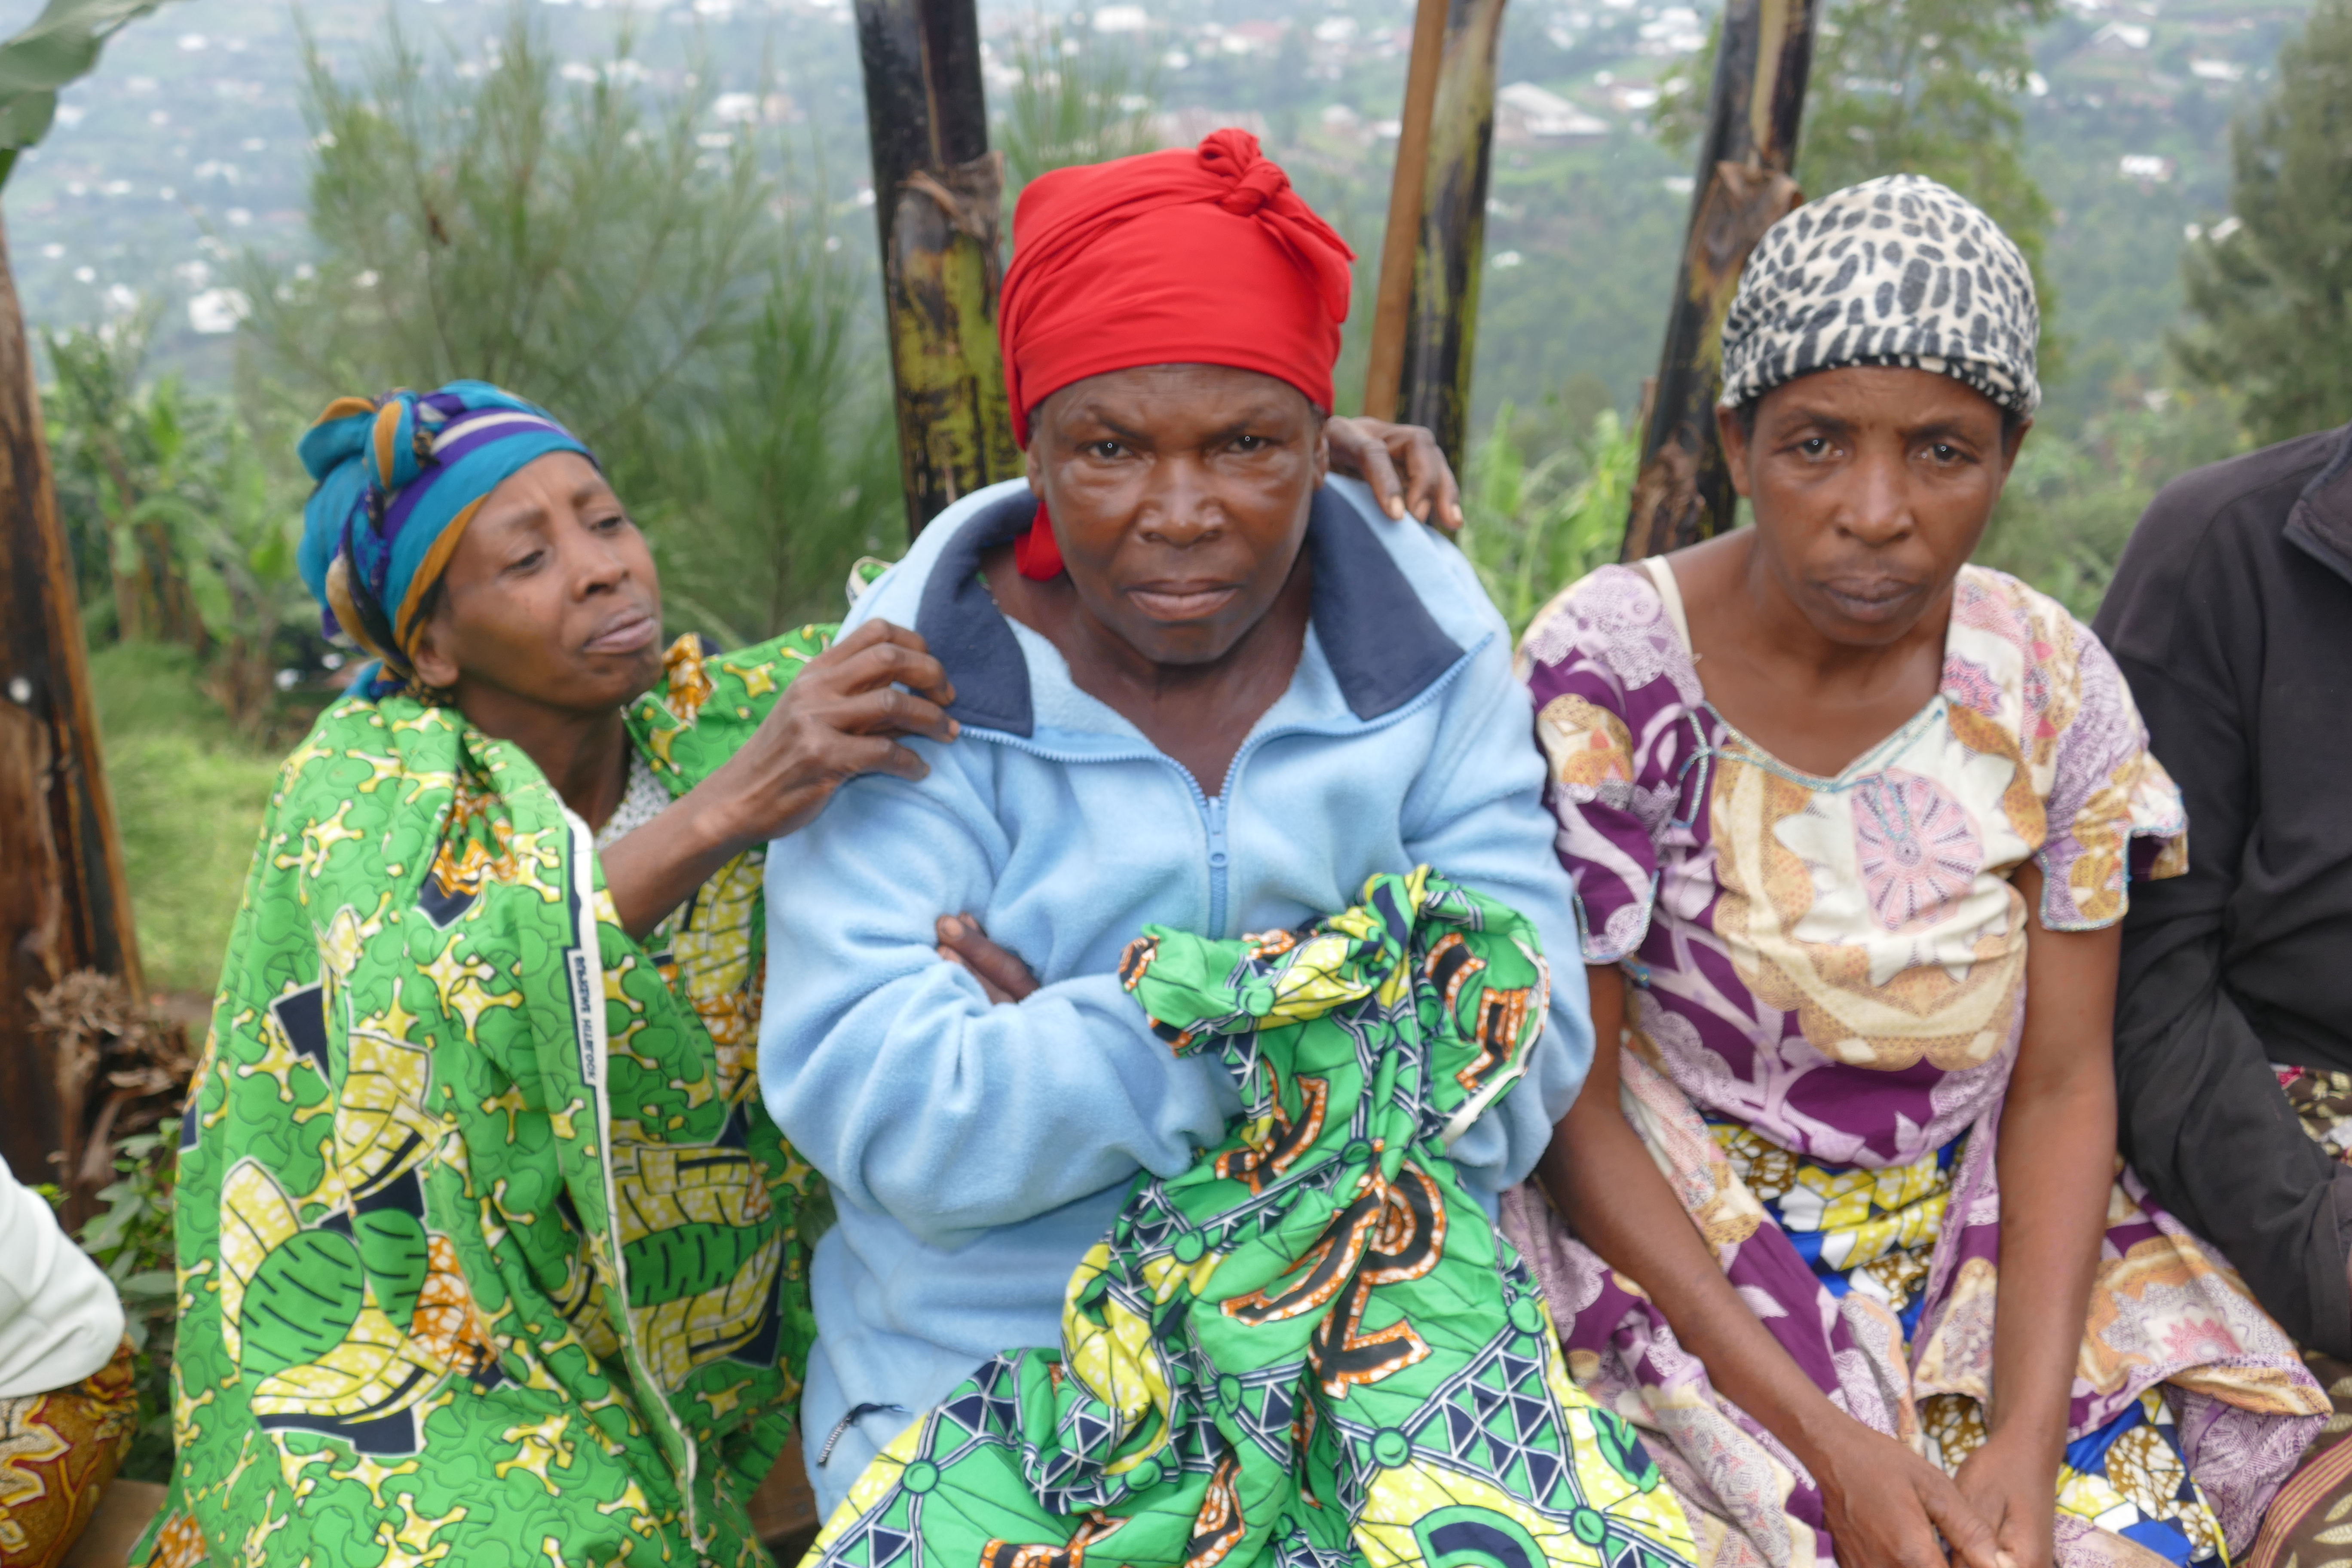 Women in DRC look into the camera